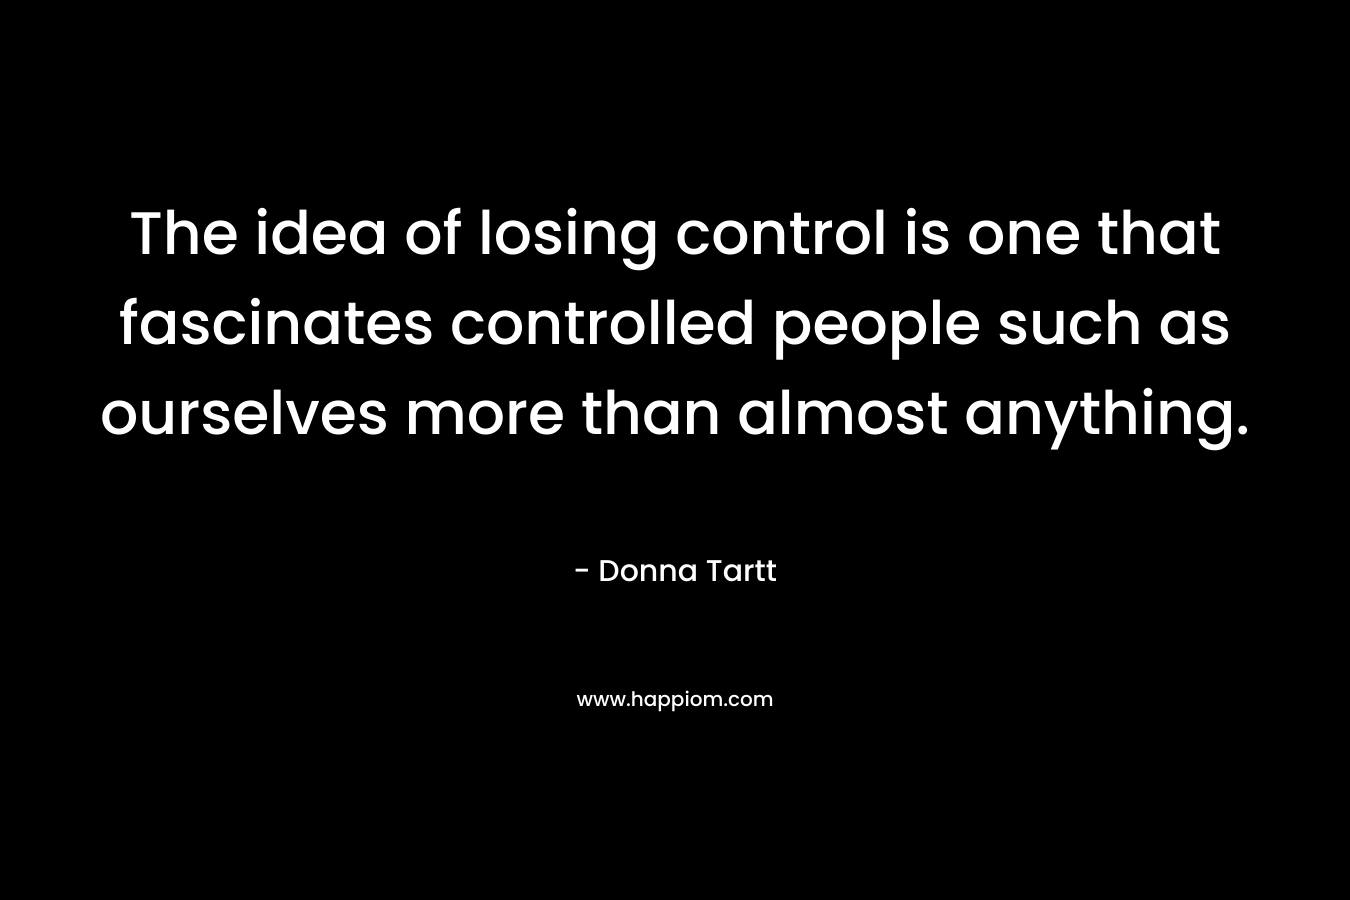 The idea of losing control is one that fascinates controlled people such as ourselves more than almost anything. – Donna Tartt